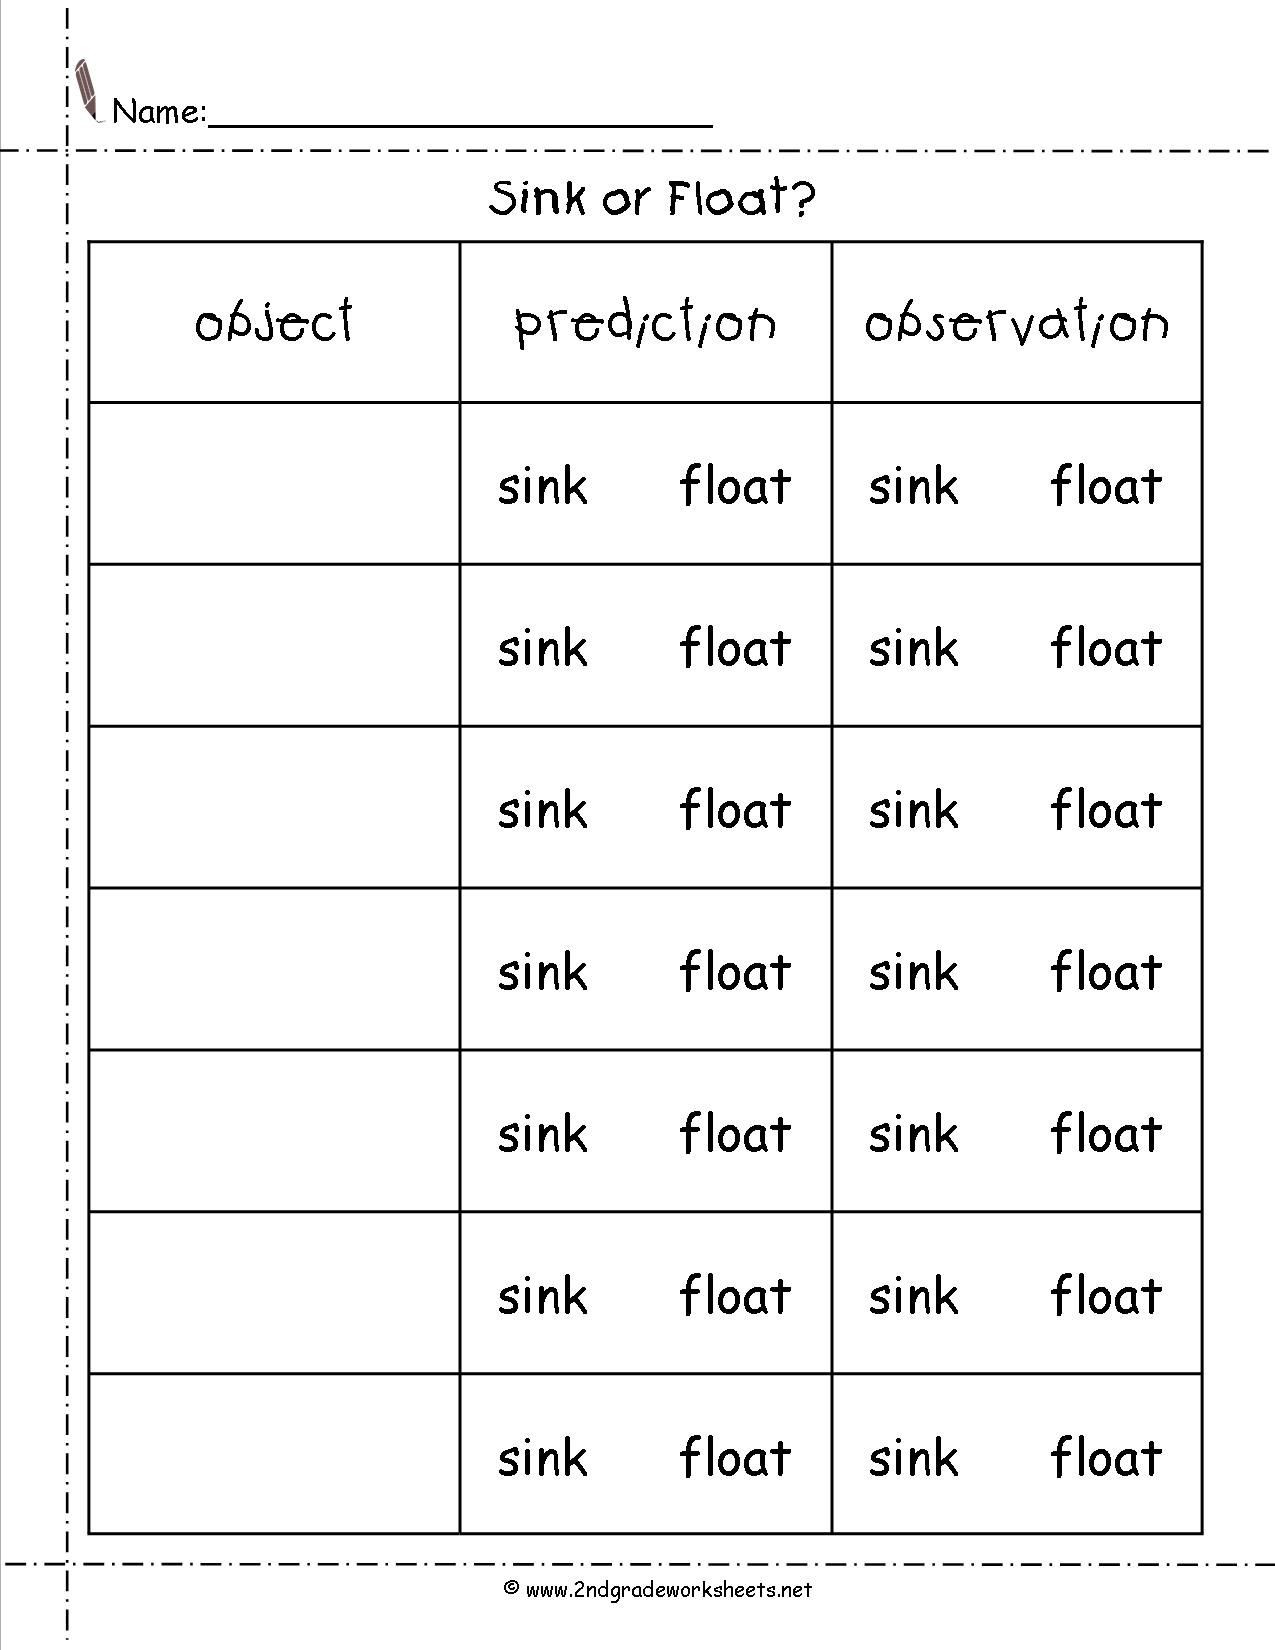 Sink or Float Worksheet Science Worksheets and Printouts From the Teacher S Guide